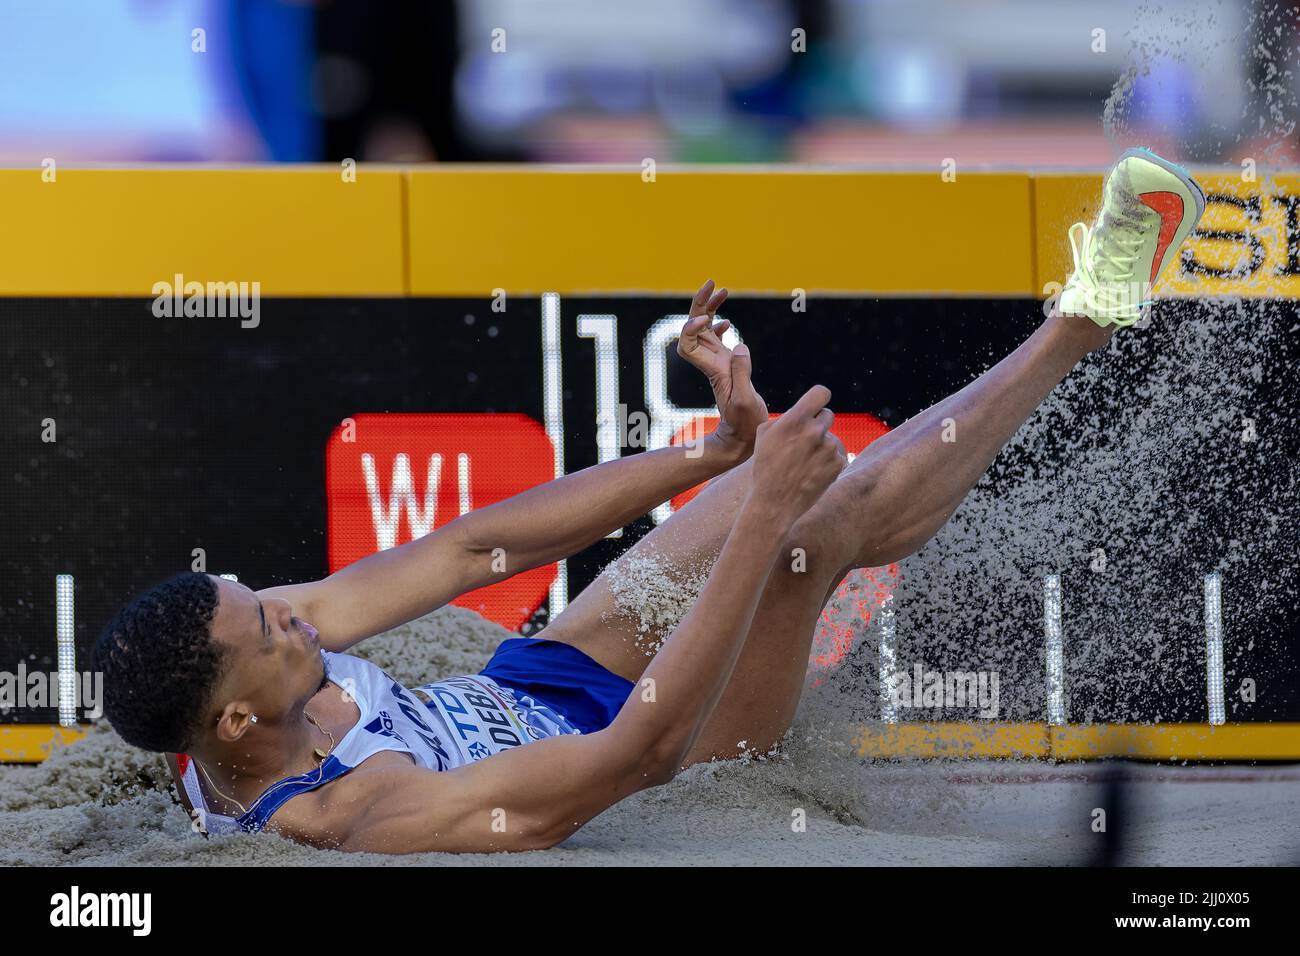 2022-07-22 03:36:32 EUGENE - Enzo Hodebar (FRA) in action during the triple jump qualifying session on the seventh day of the World Athletics Championships at Hayward Field stadium. ANP ROBIN VAN LONKHUIJSEN netherlands out - belgium out Stock Photo